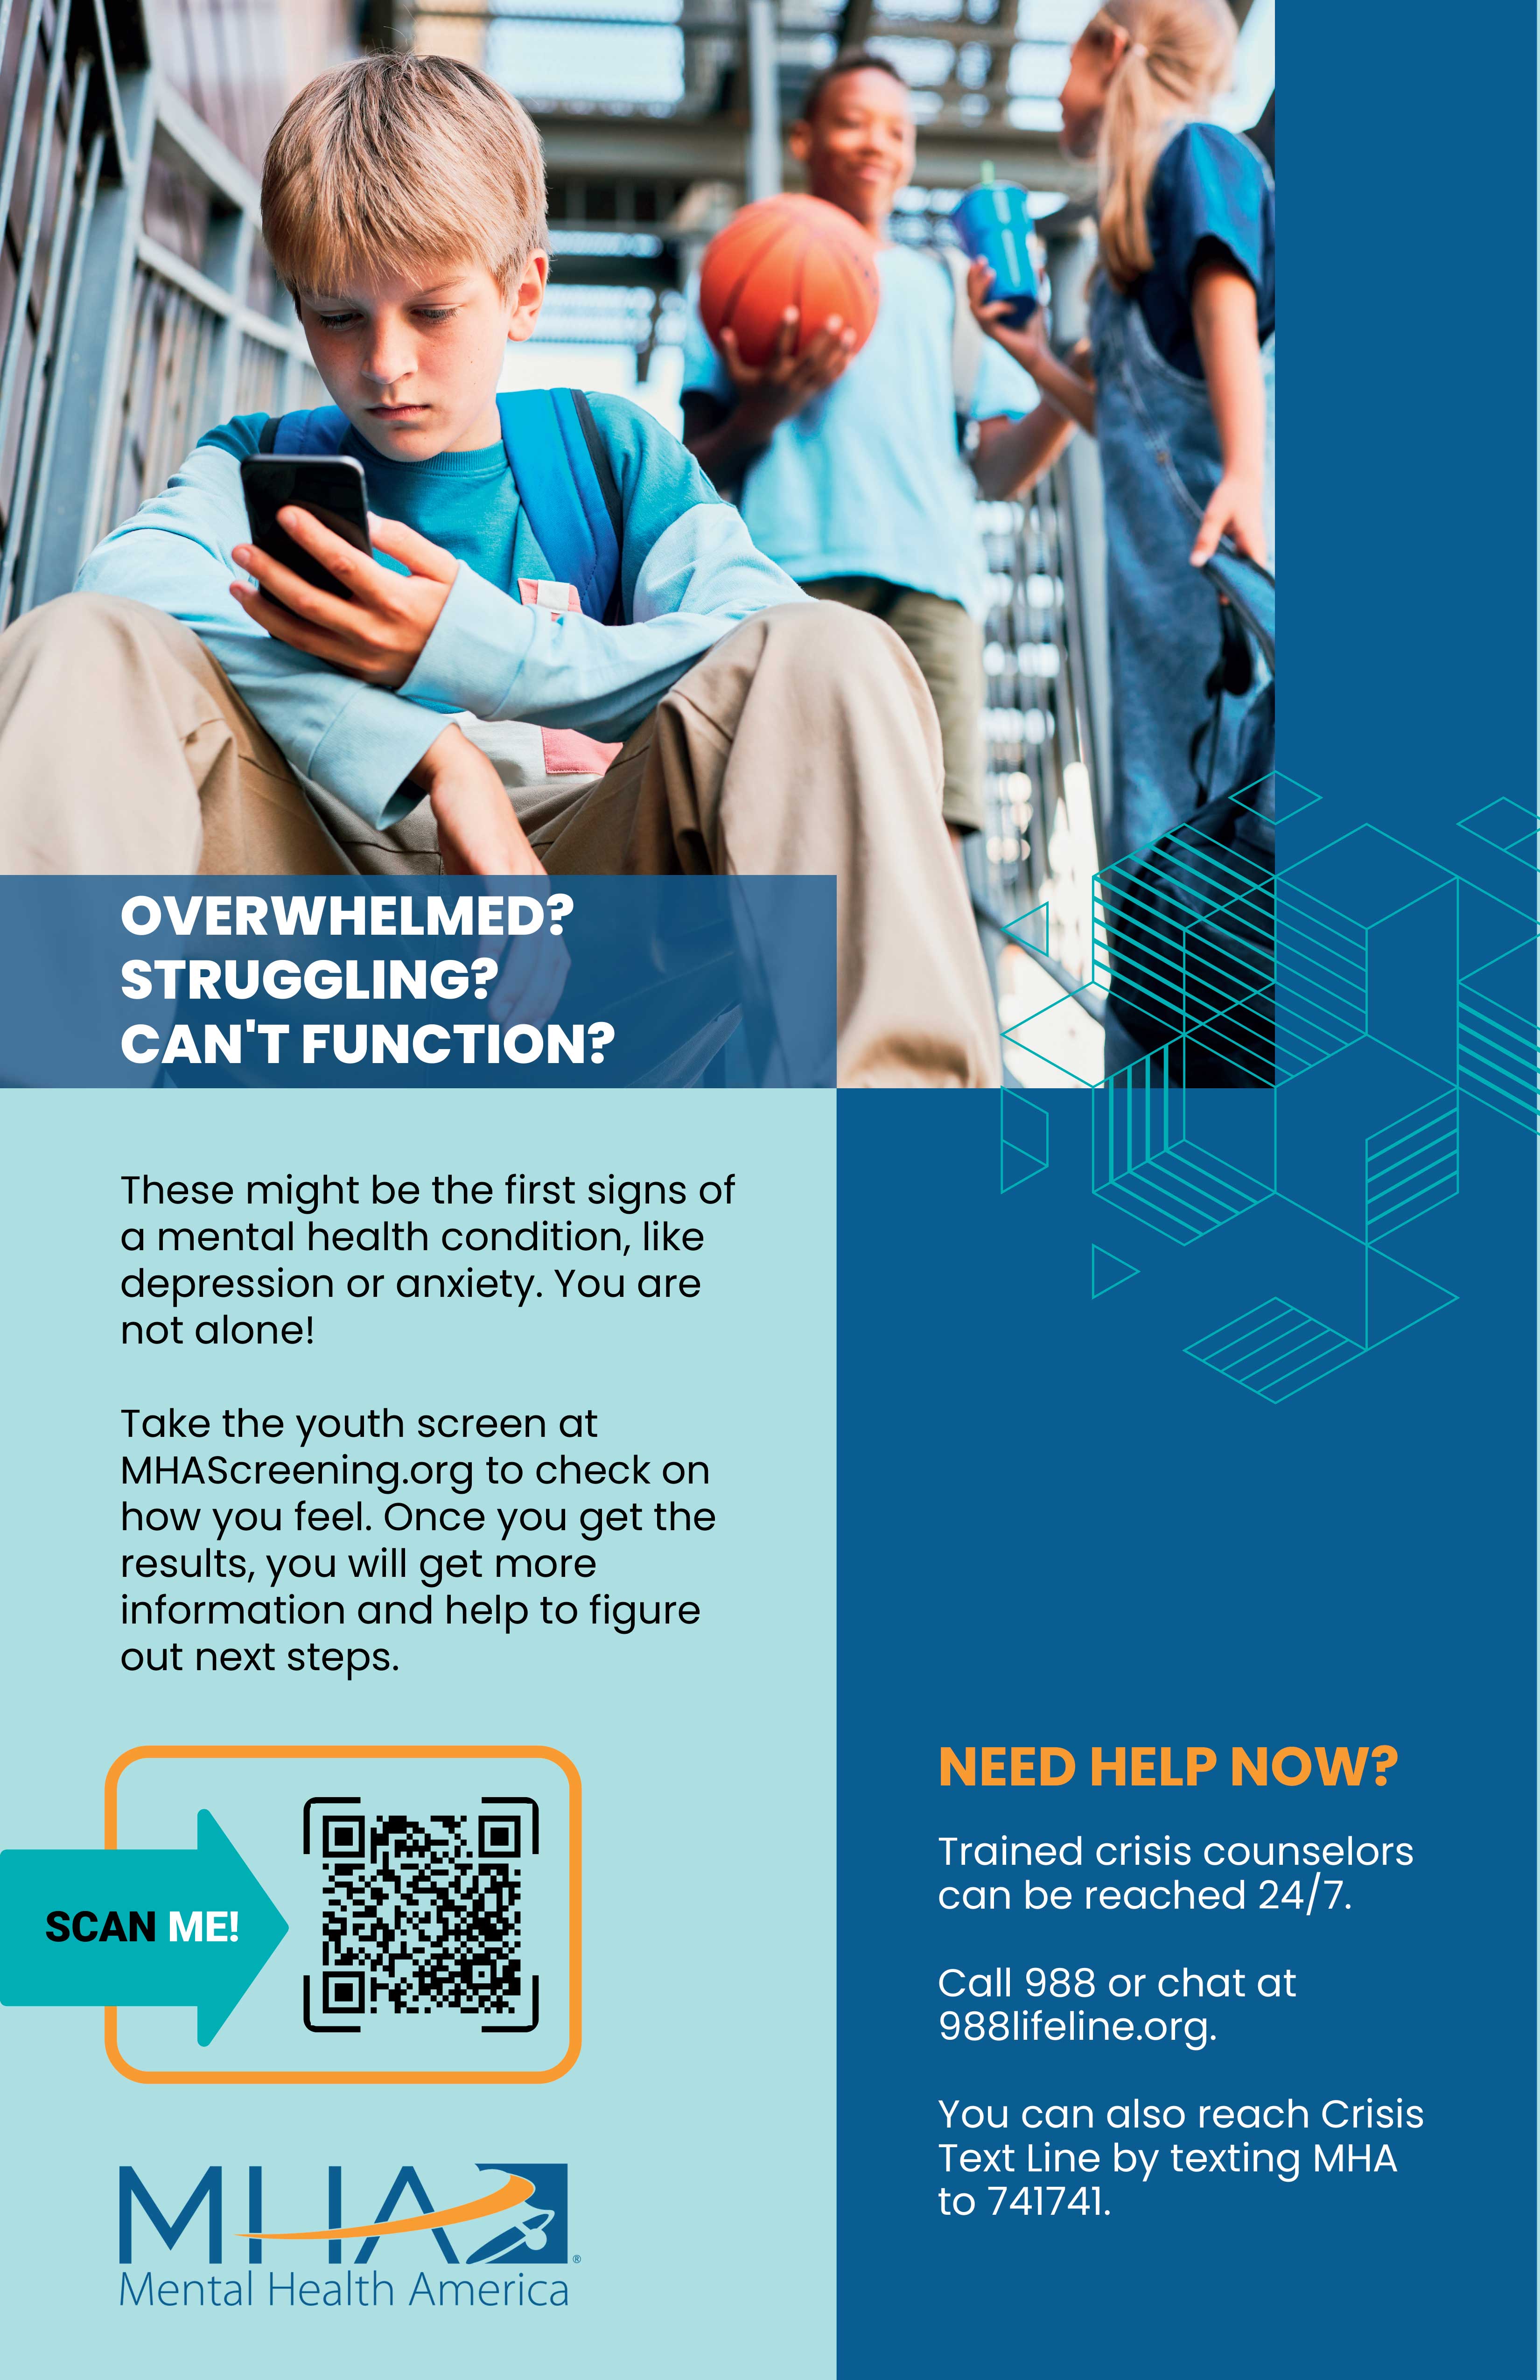 Overwhelmed? Struggling? Can't function? Take the youth screen at MHAScreening.org to check on how you feel.